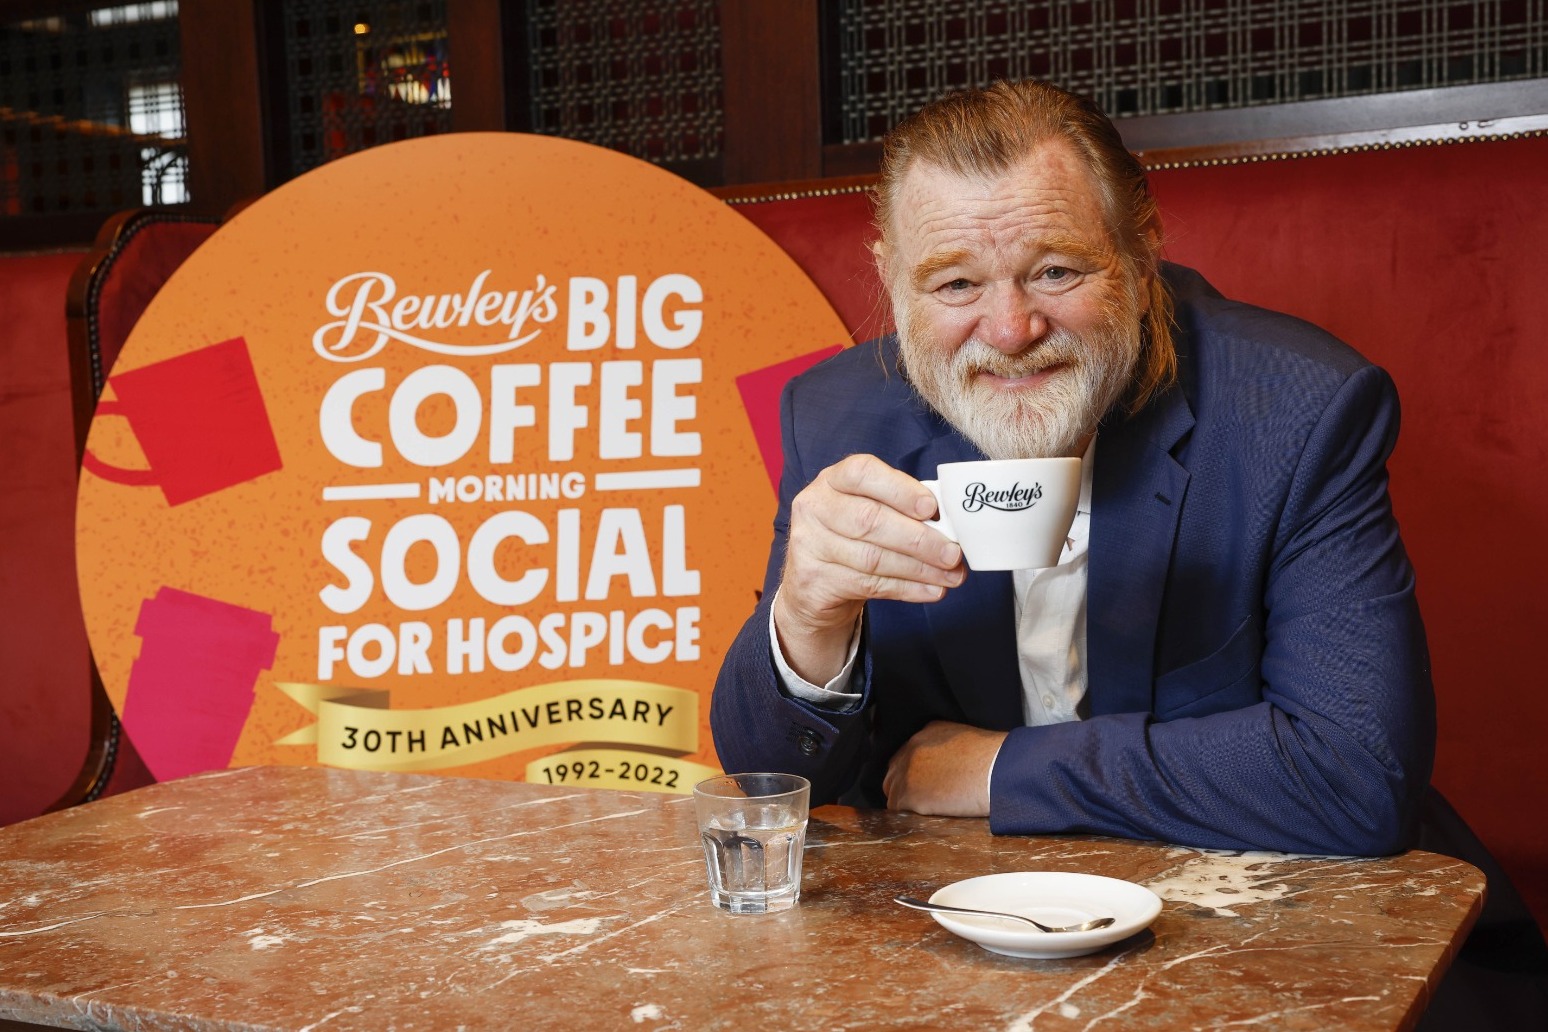 Hollywoods Brendan Gleeson backs coffee morning for life affirming hospices